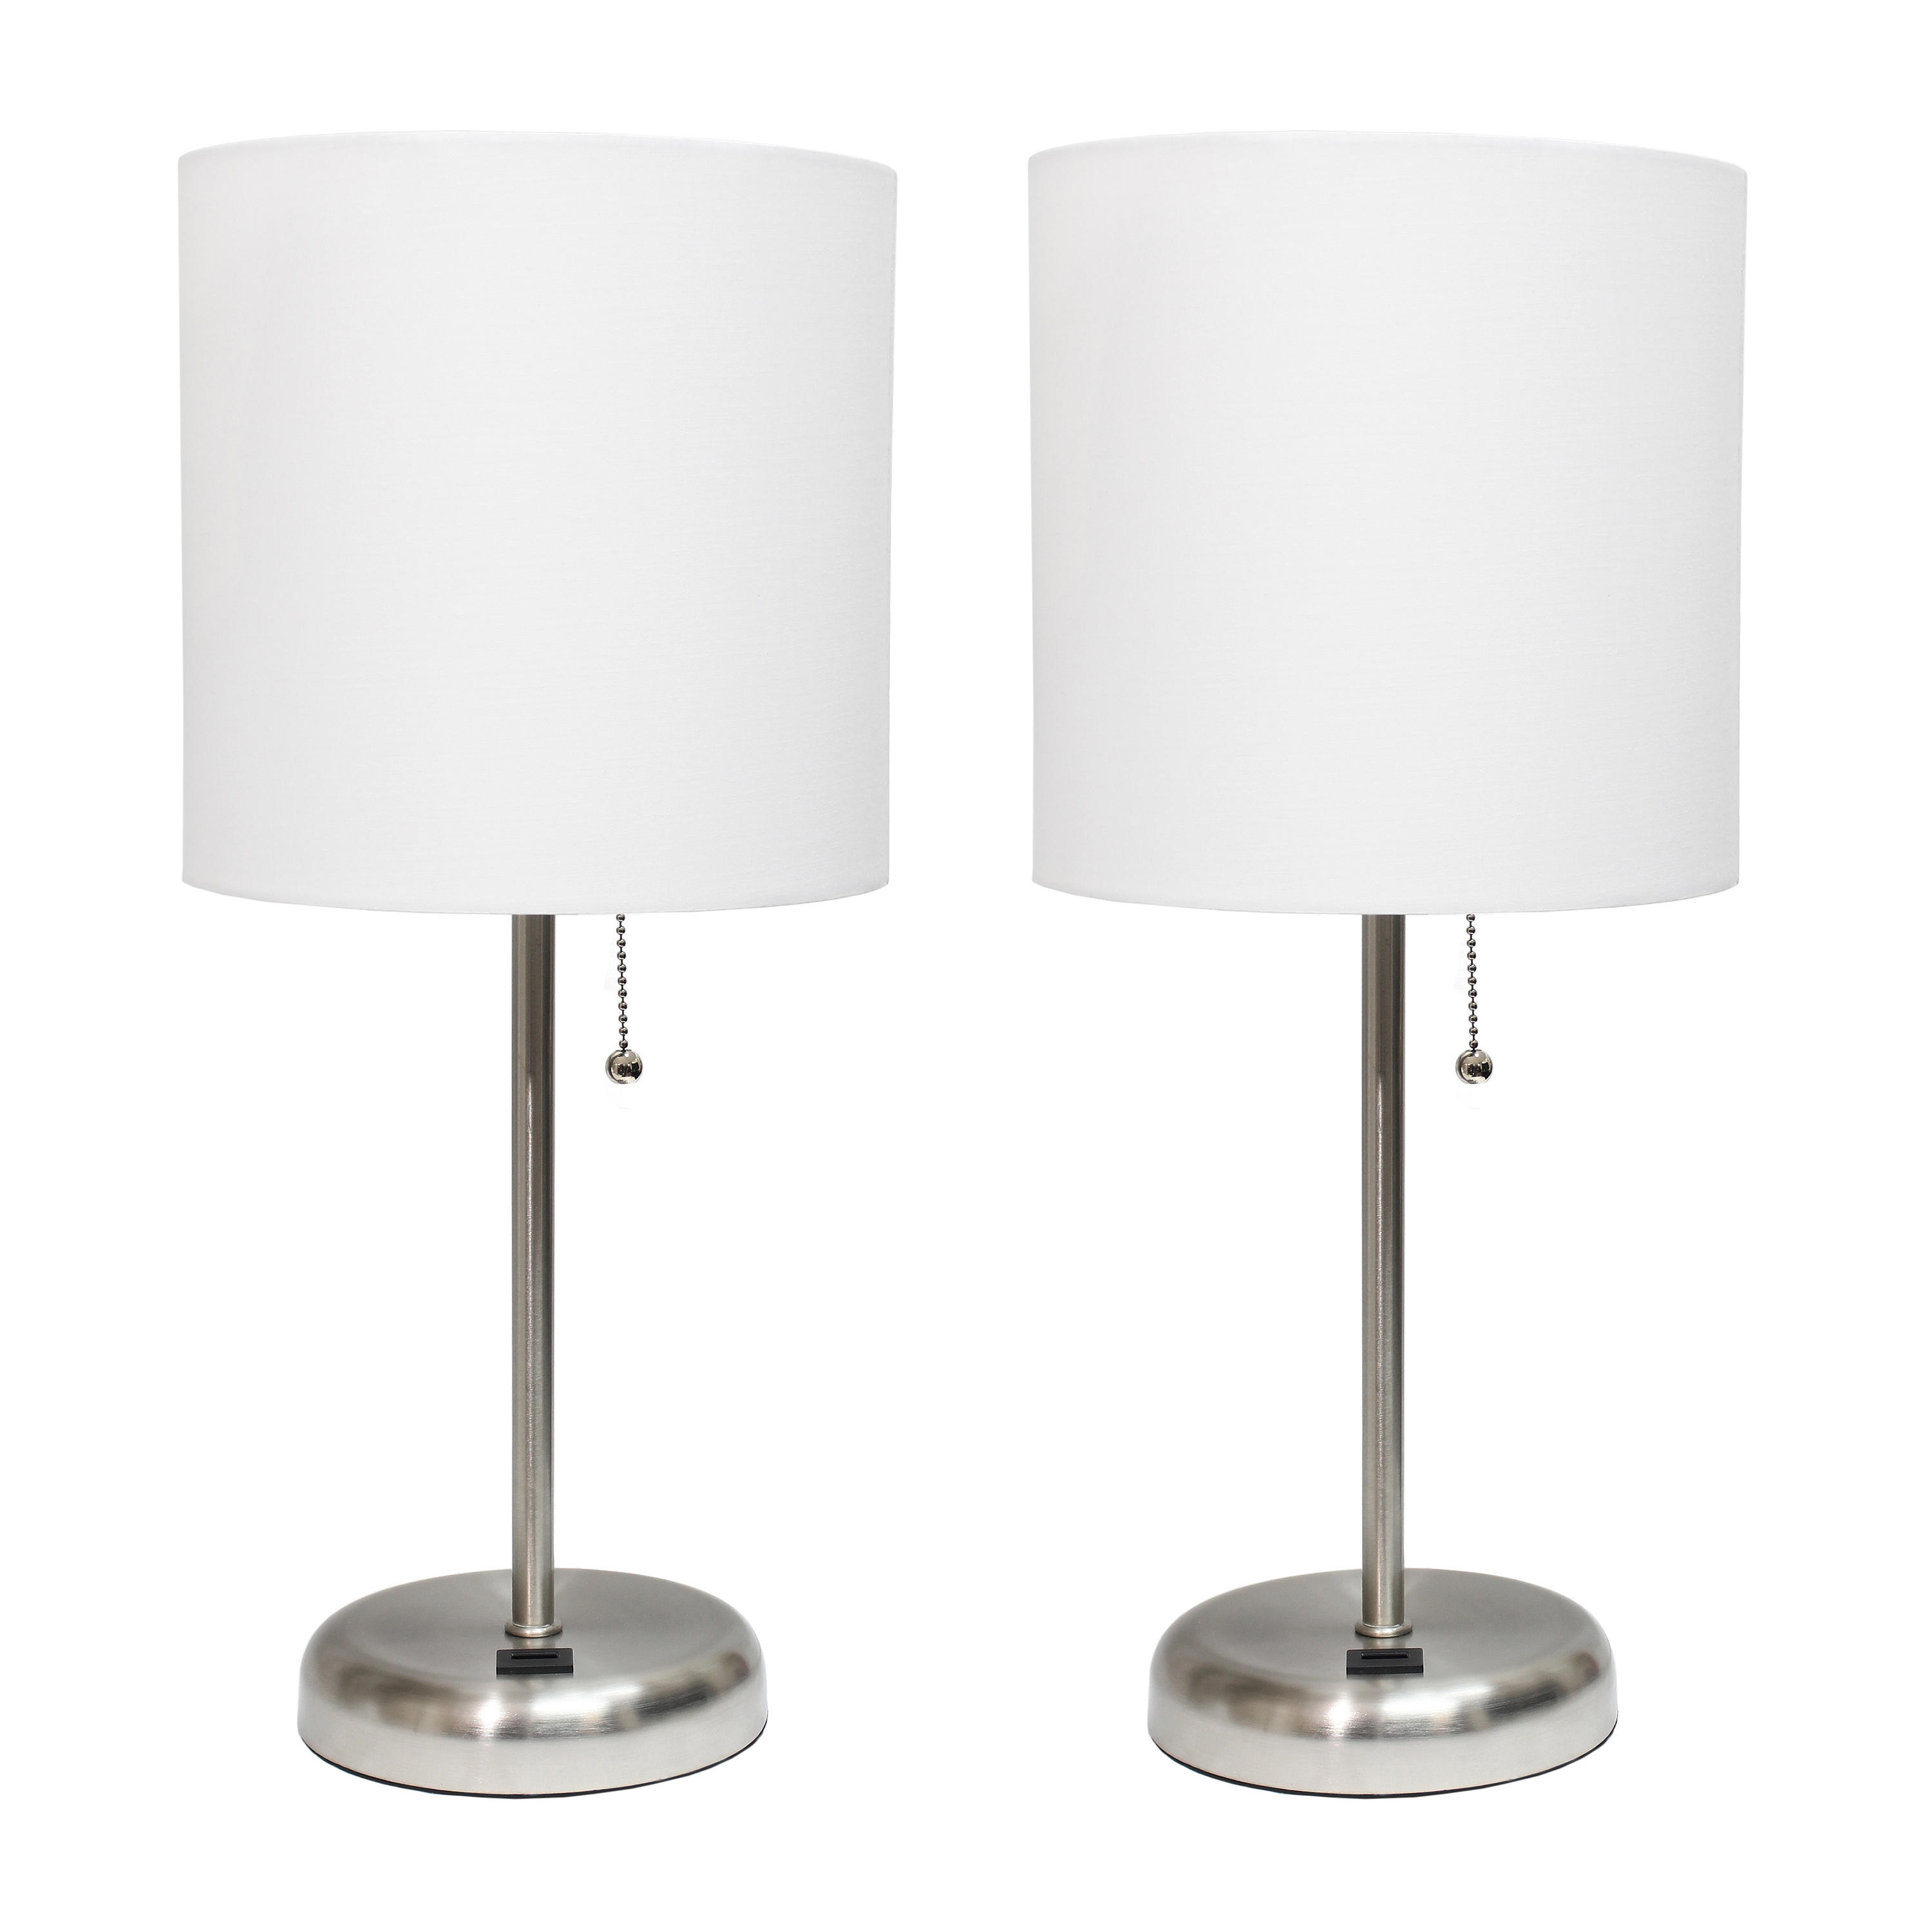 LimeLights Stick Lamp with USB charging port and Fabric Shade 2 Pack Set, White